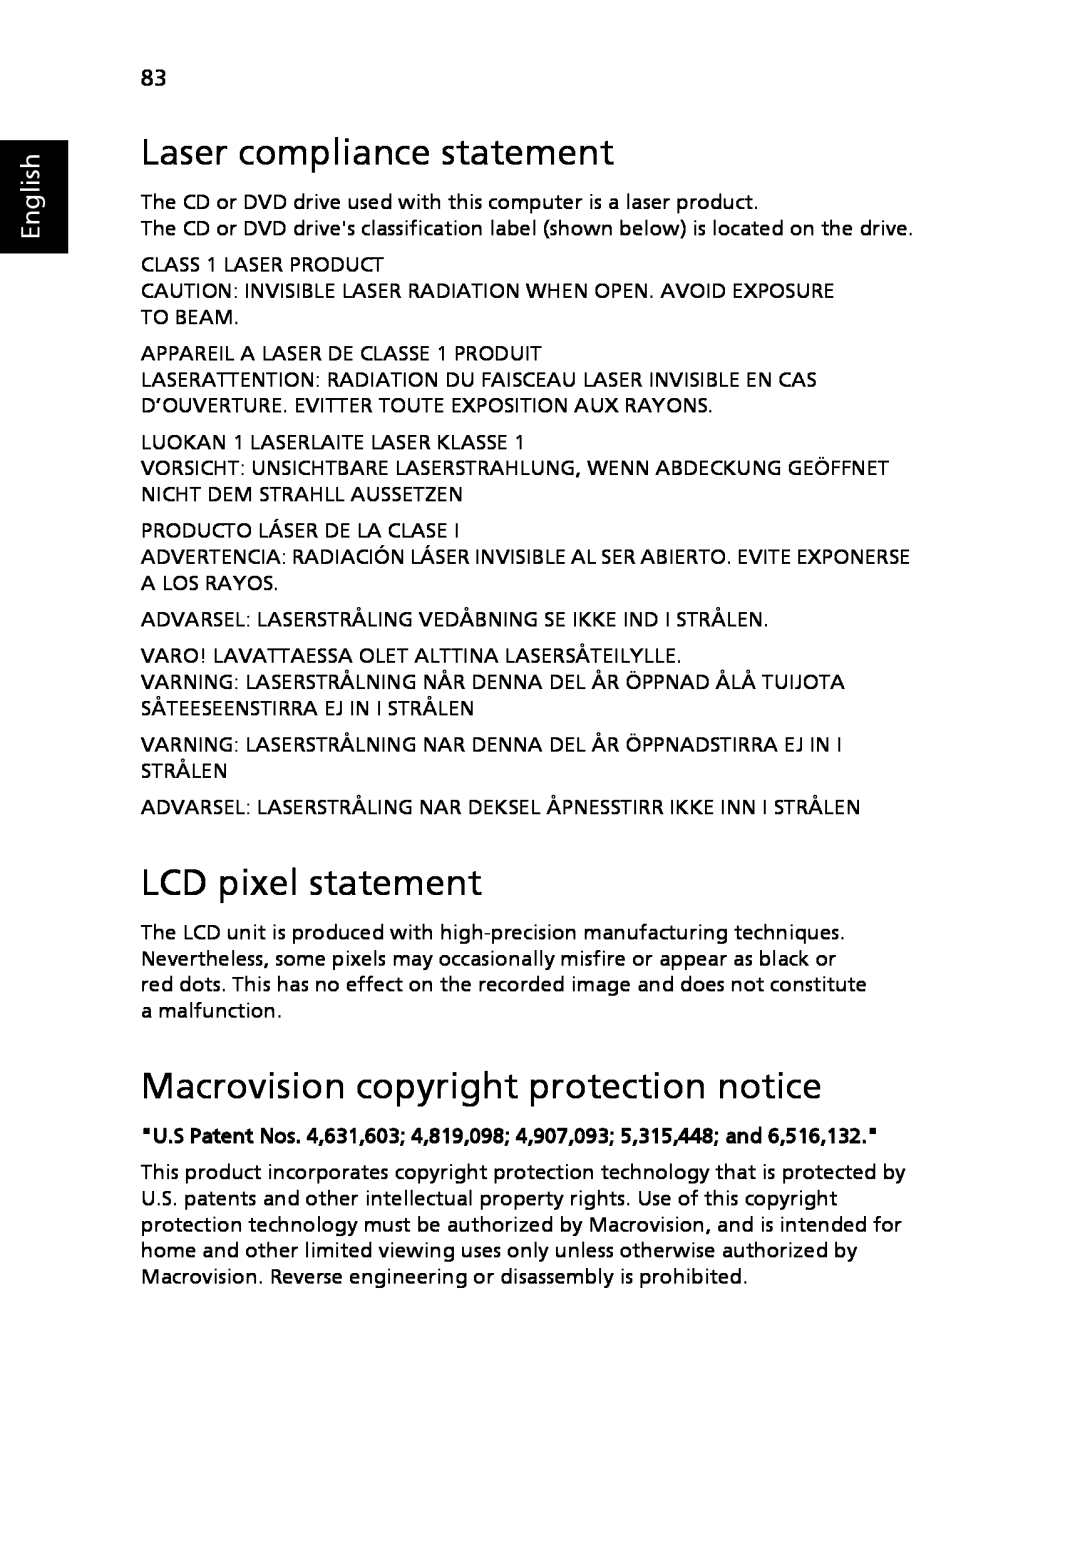 Acer 8920 Series, LE1 Laser compliance statement, LCD pixel statement, Macrovision copyright protection notice, English 